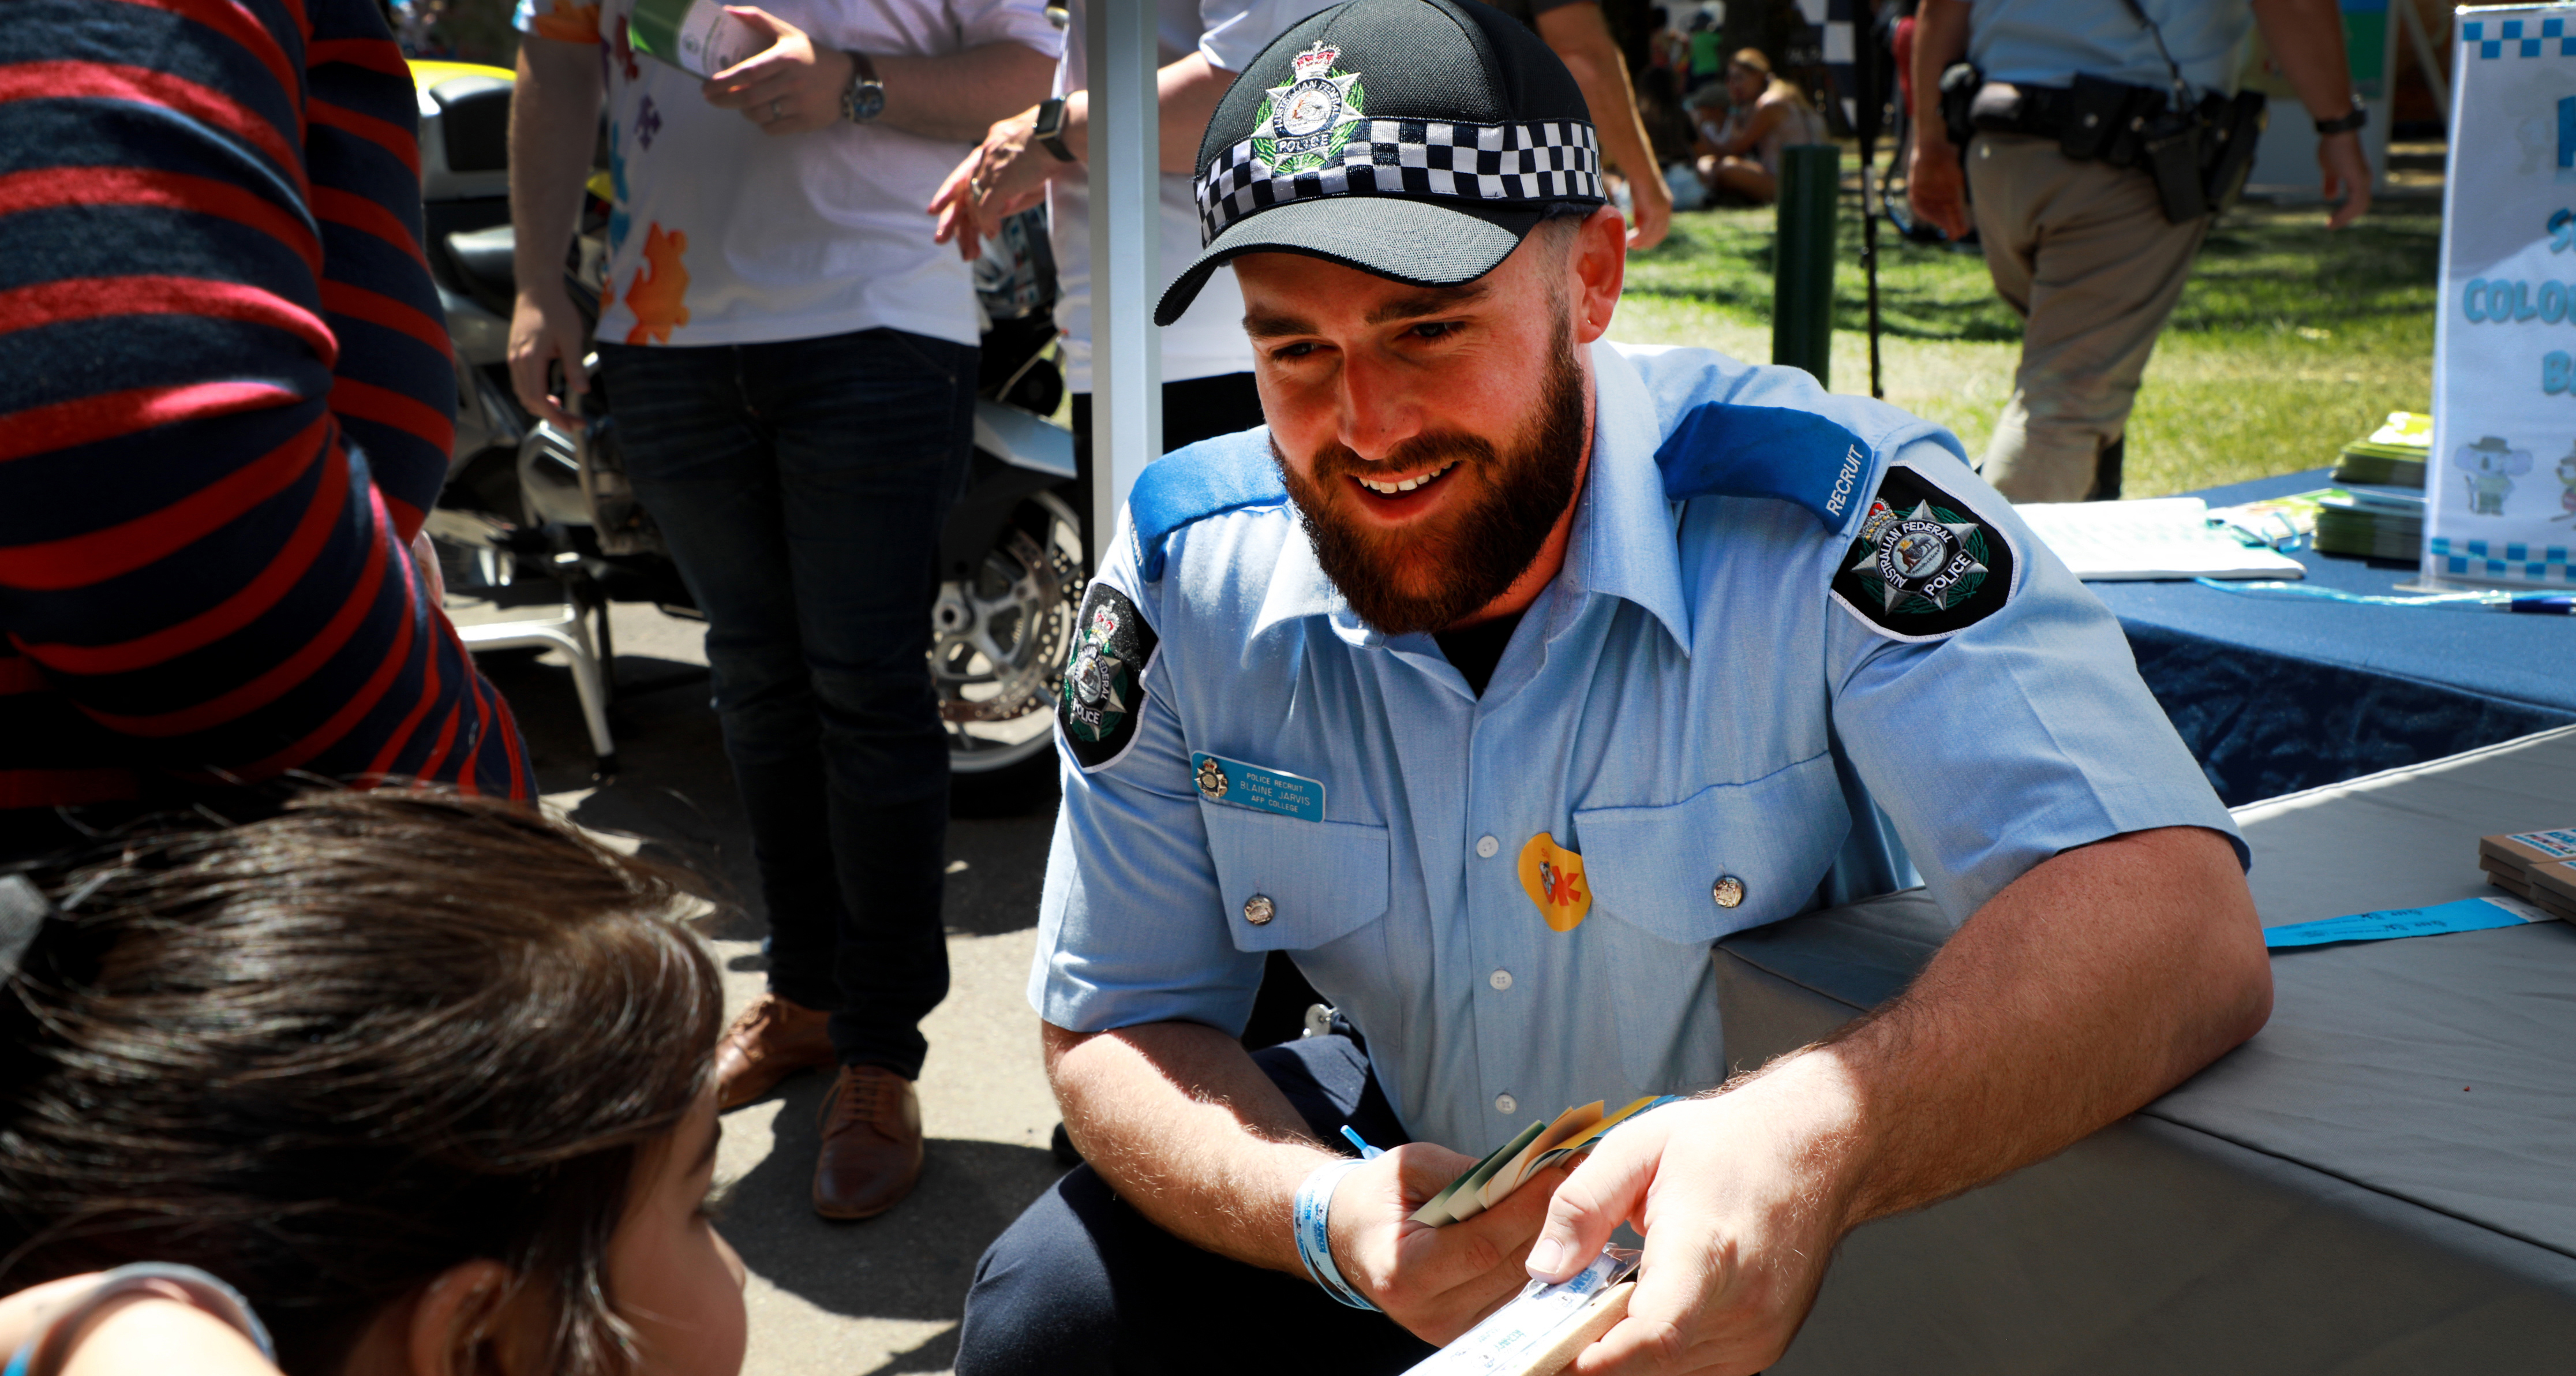 ACT Policing member hands out stickers at community event